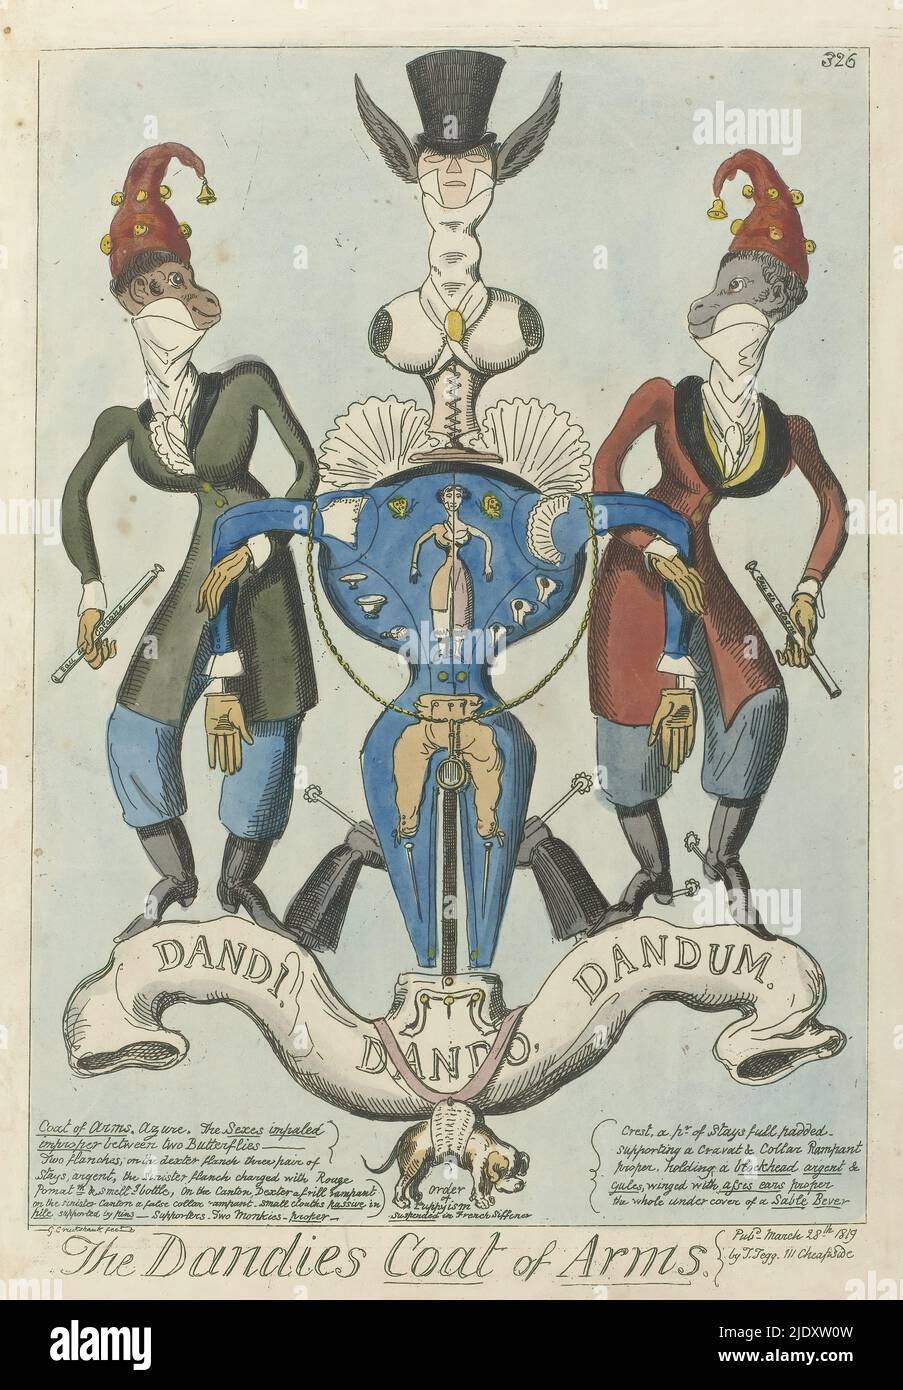 Two clothed monkeys hold a coat of arms in the form of a mannequin, The Dandies Coat of Arms (title on object), Below the coat of arms the coat of arms motto Dandi - Dando - Dandum on a ribbon formed of pants from which hangs an order sign with a dog. Below the image a description of the coat of arms in English., print maker: George Cruikshank, (mentioned on object), publisher: Thomas Tegg, (mentioned on object), London, 28-Mar-1819, paper, etching, height 349 mm × width 246 mm Stock Photo